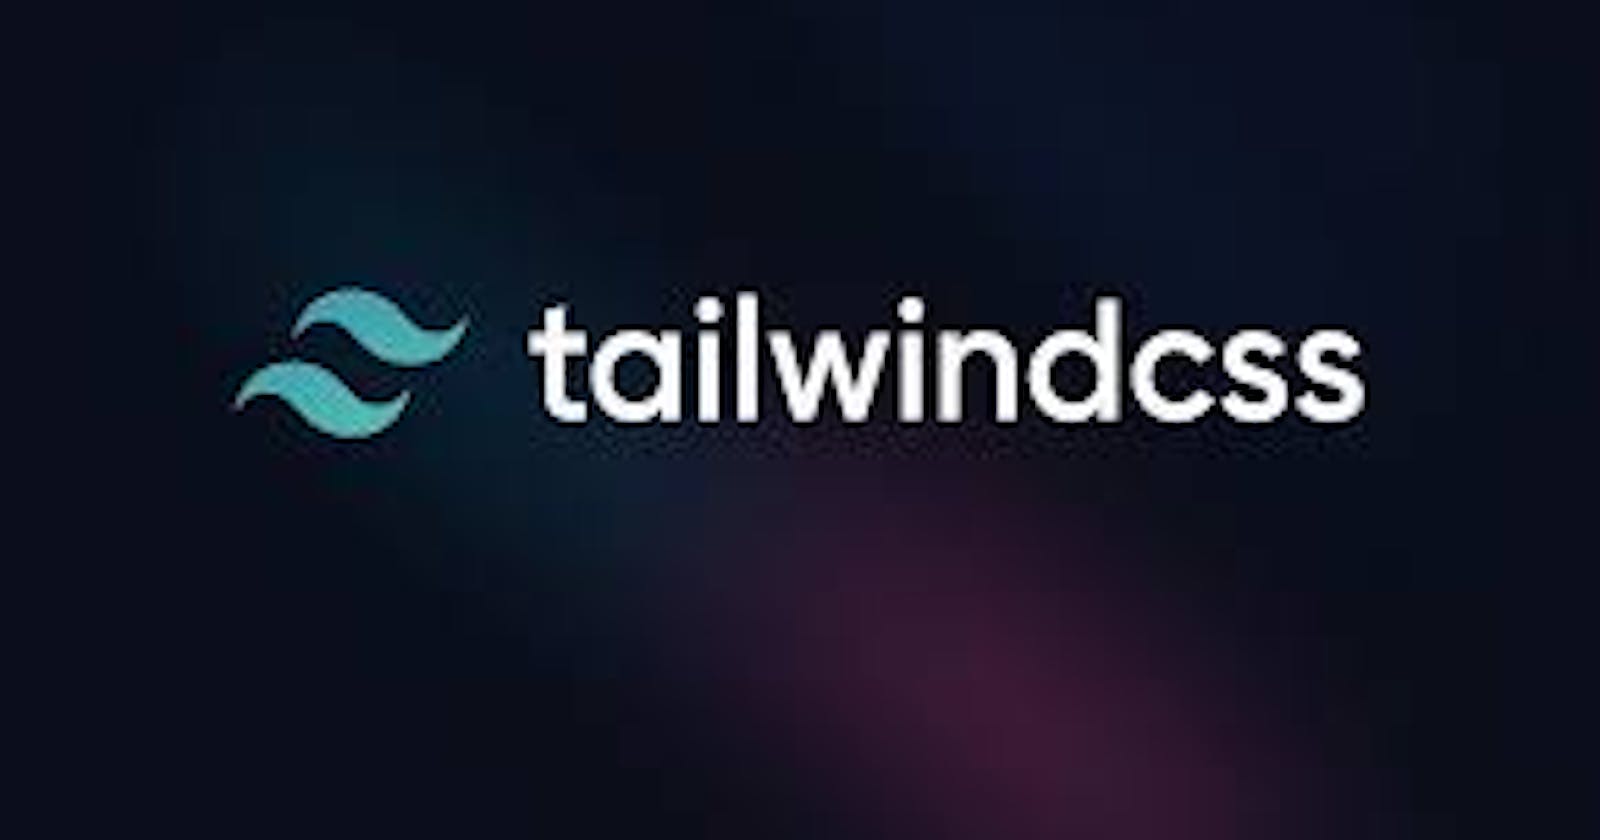 How To Learn TailwindCSS The Fast and Easy Way!